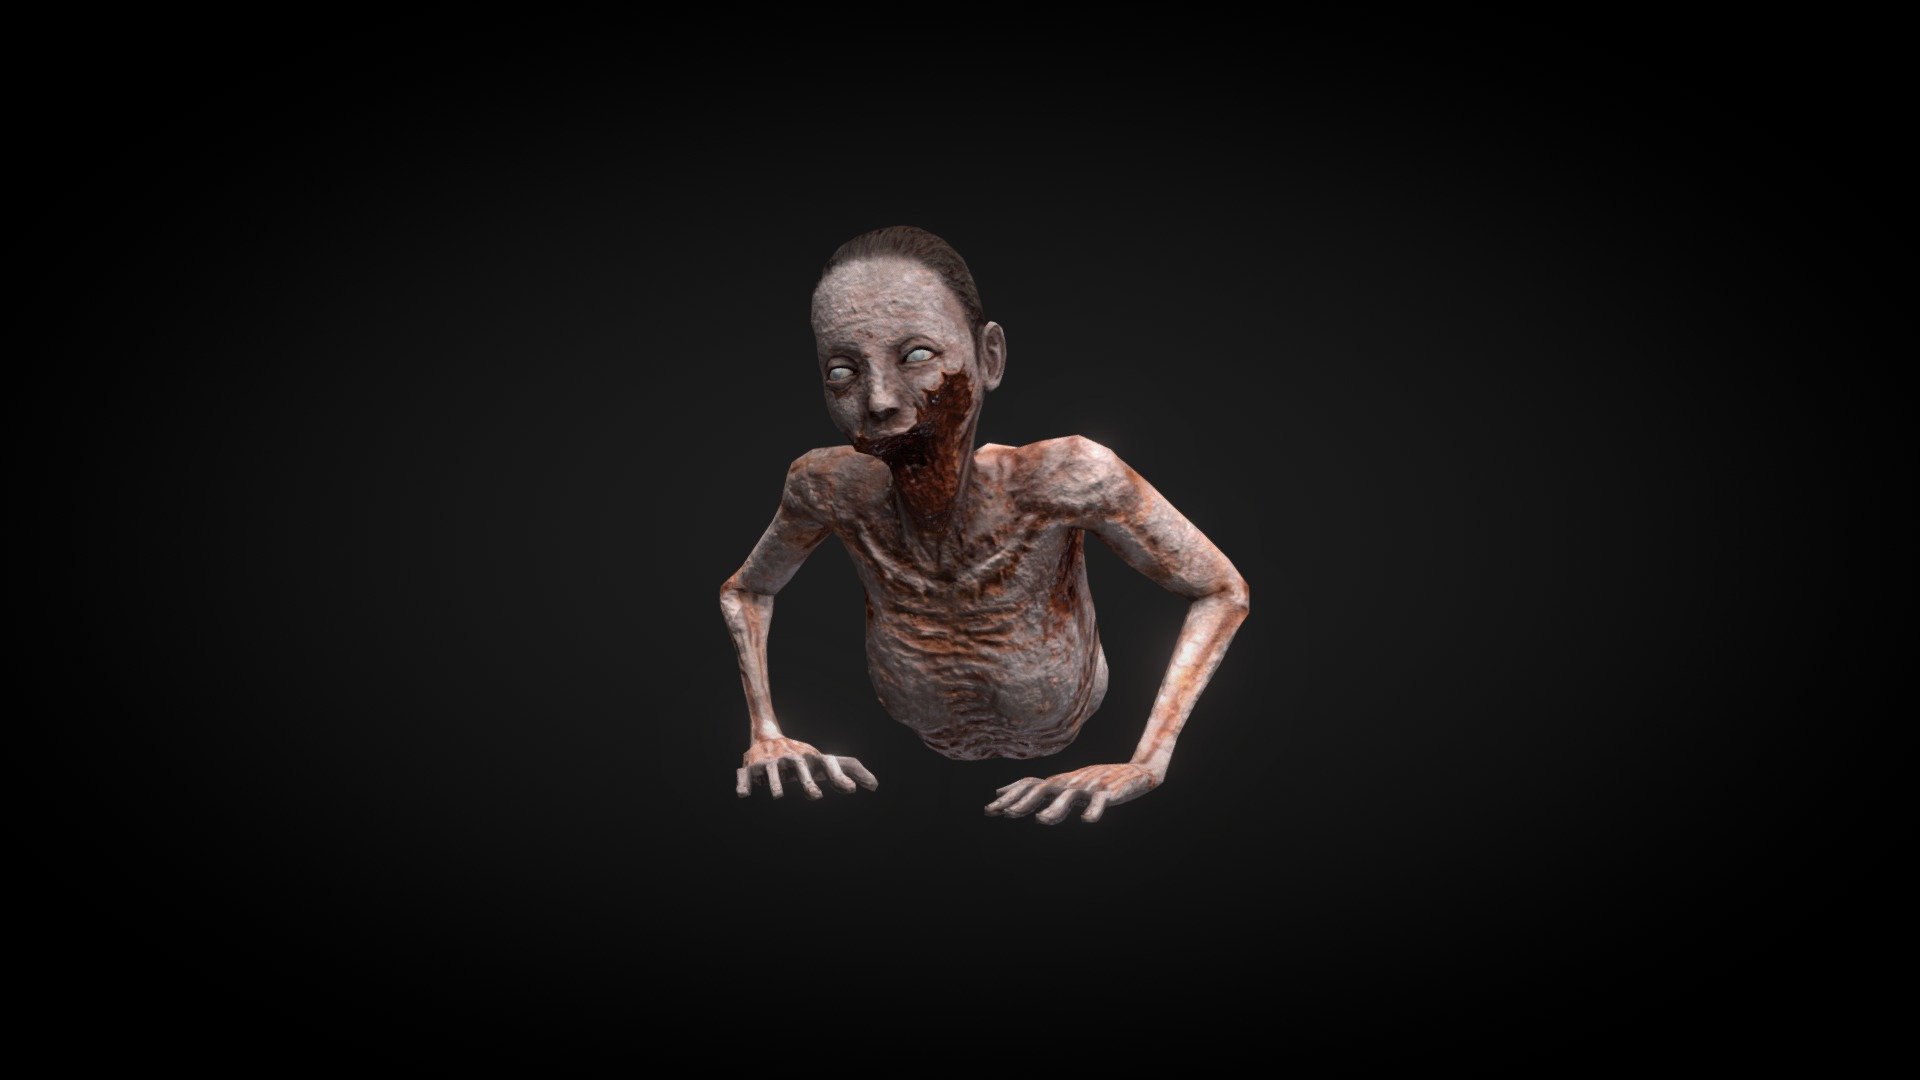 【Crawling Corpse】

Animation List



Attack

Die

Idle

Move Forth

Move Right

Move Left

Move Back


Artstation:https://www.artstation.com/artwork/0Xkya4 - Crawling Corpse - Buy Royalty Free 3D model by Shao Xii (@shaoxii) 3d model